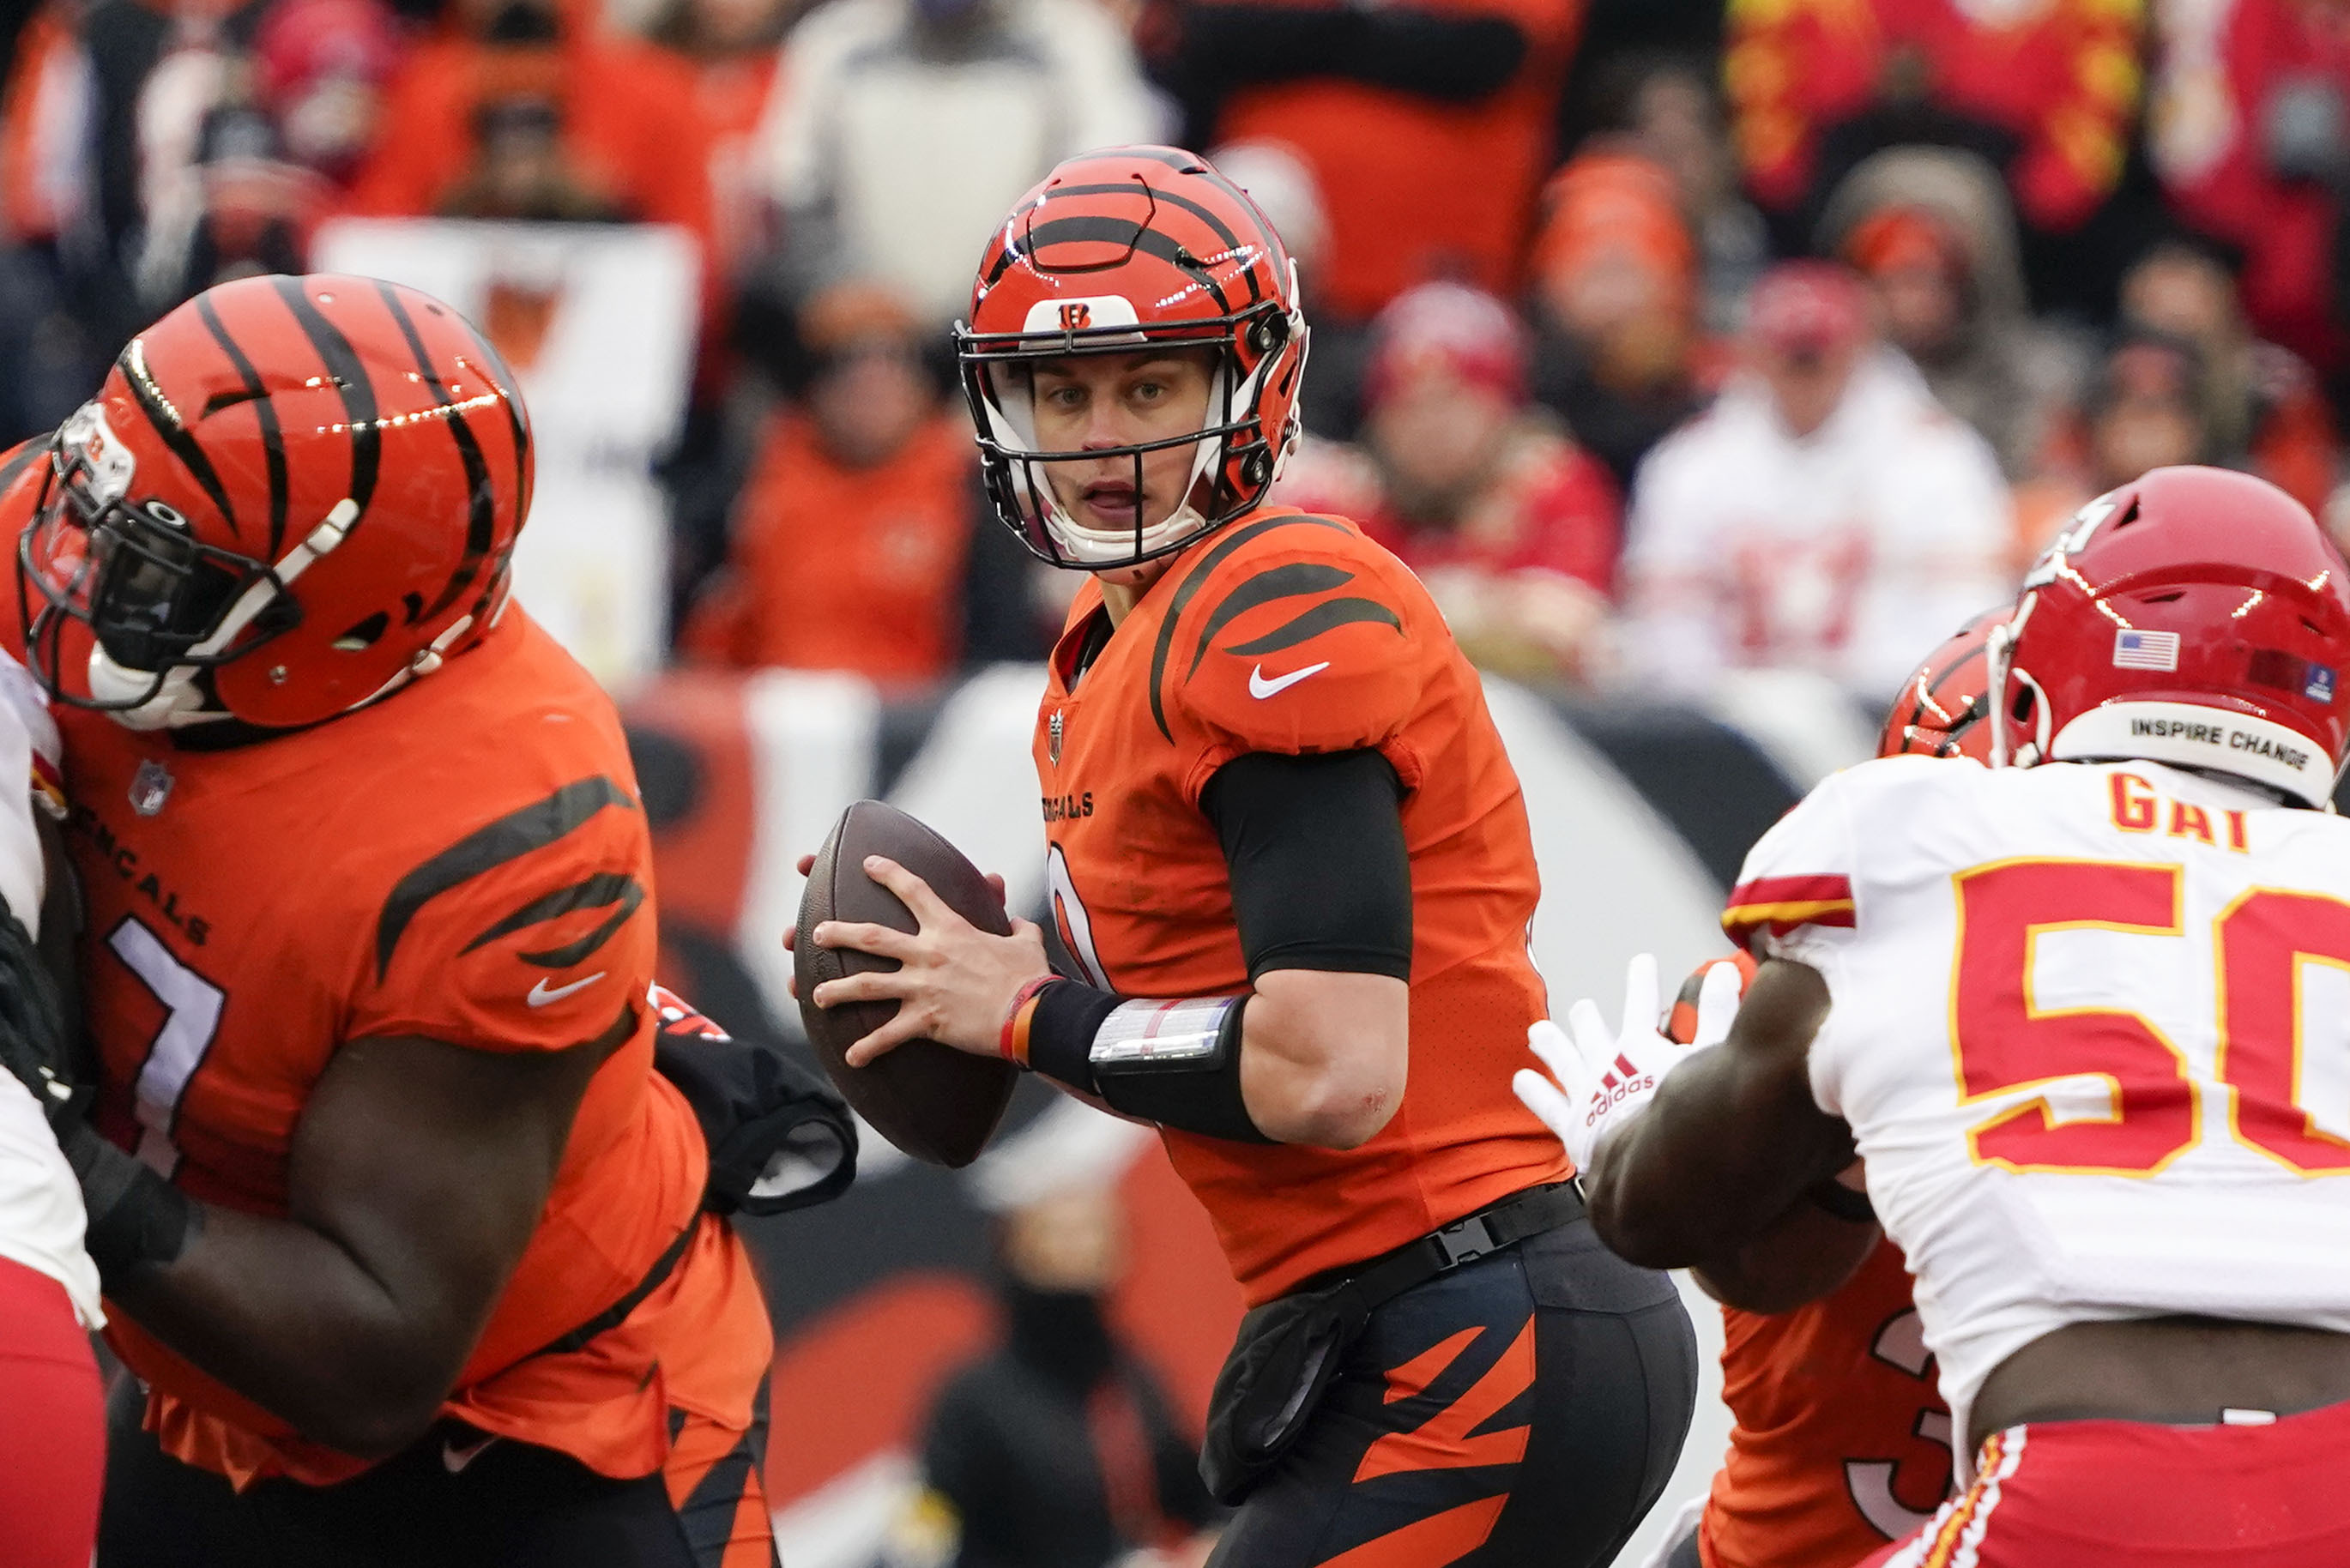 Bengals at Chiefs: 5 storylines to watch in today's AFC